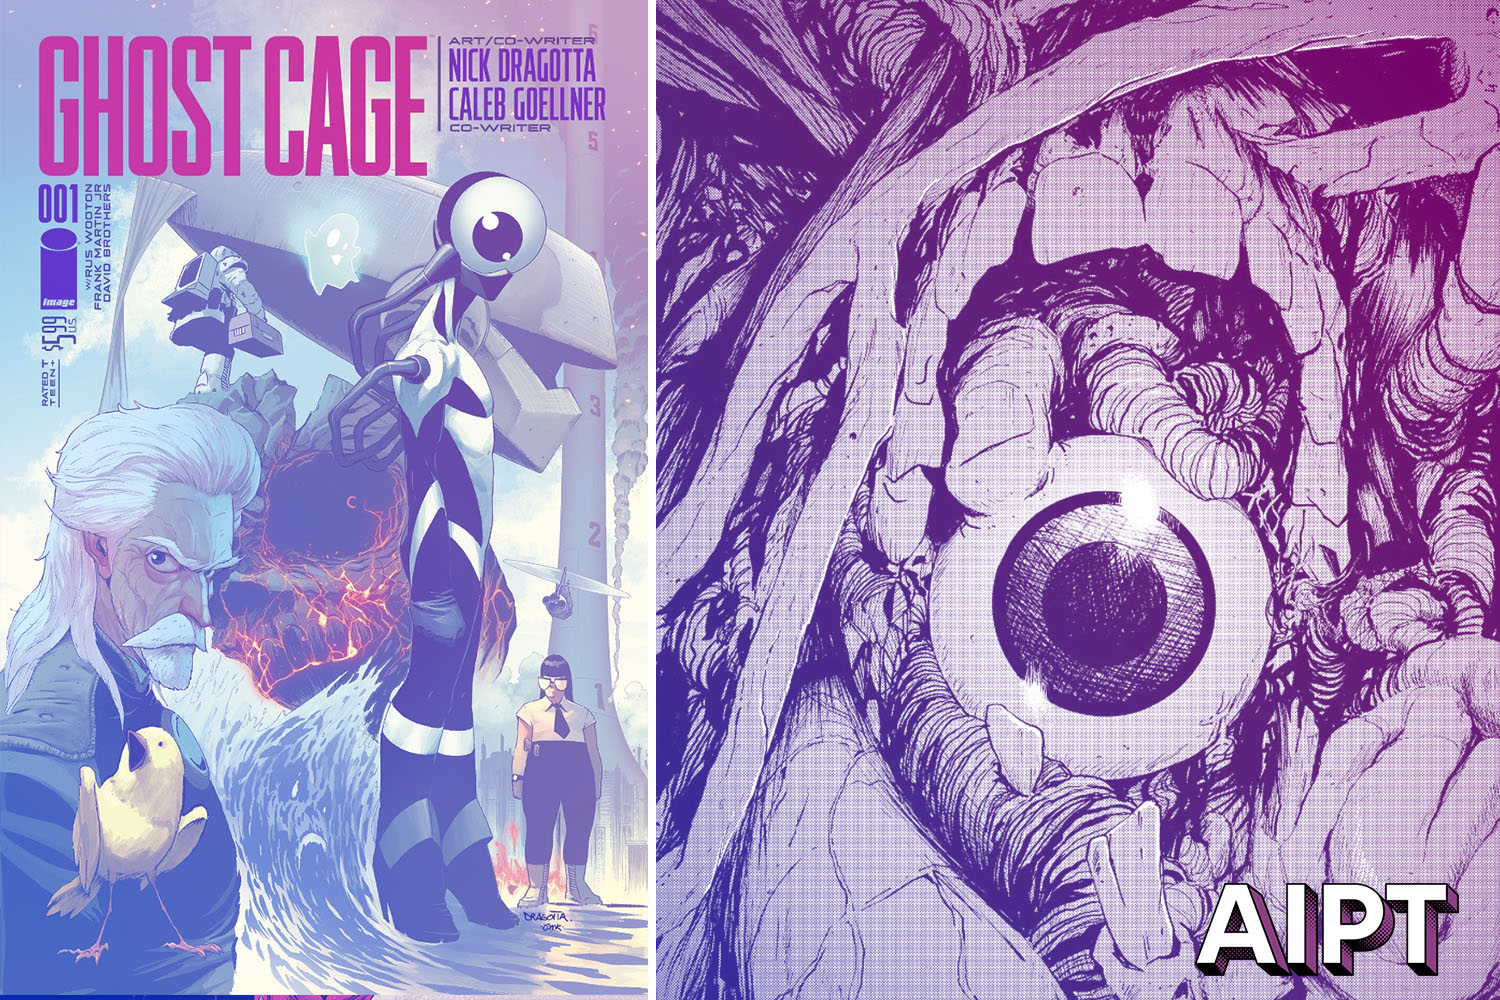 Sci-fi adventure 'Ghost Cage' coming March 2022 from Nick Dragotta